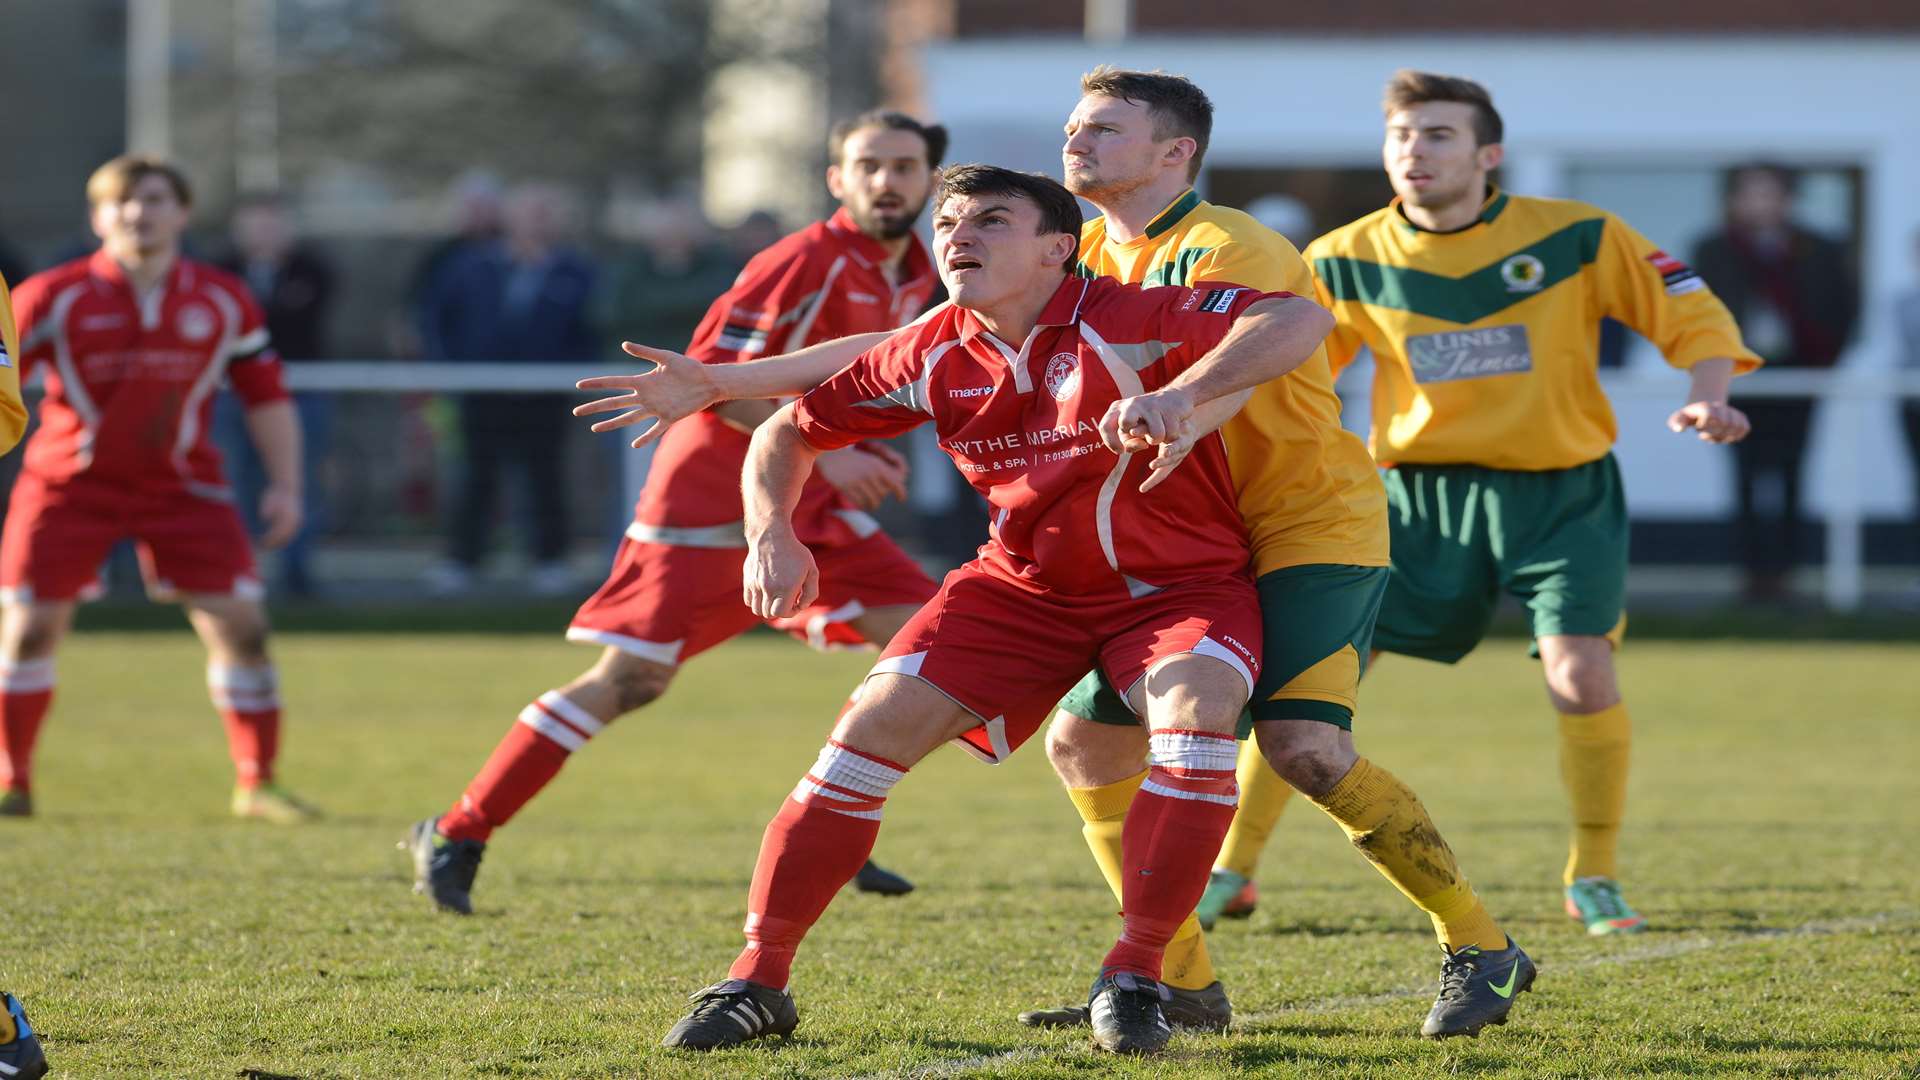 Luke Harvey battles for space during Hythe's 4-0 win over Horsham Picture: Gary Browne